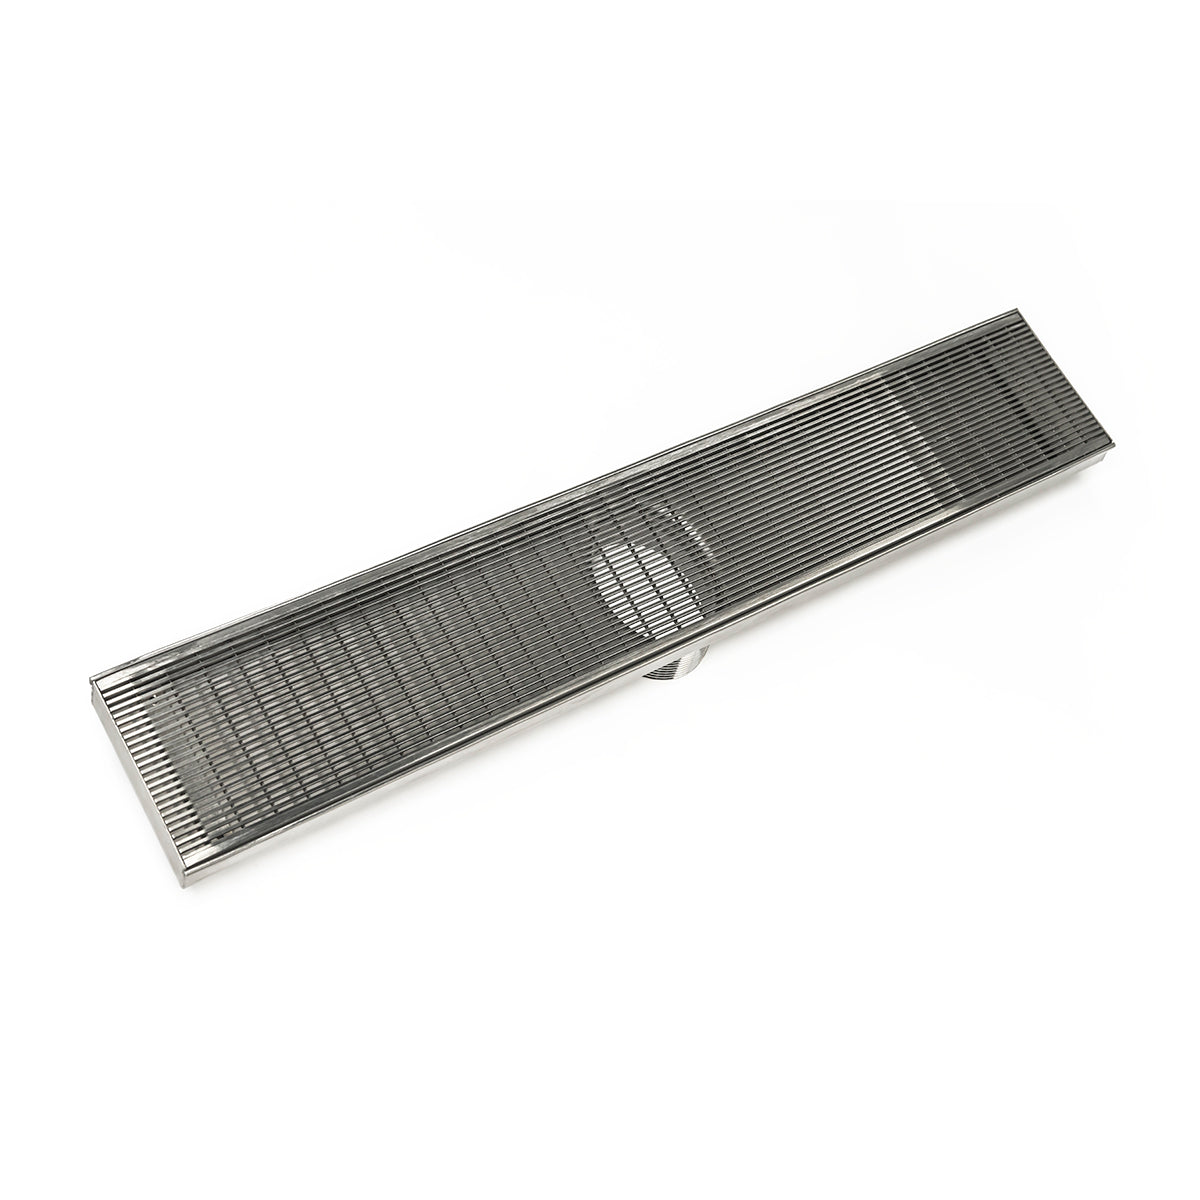 Infinity Drain 32" FX Series High Flow Fixed Length Linear Drain Kit with Wedge Wire Grate with Cast Iron Drain Body